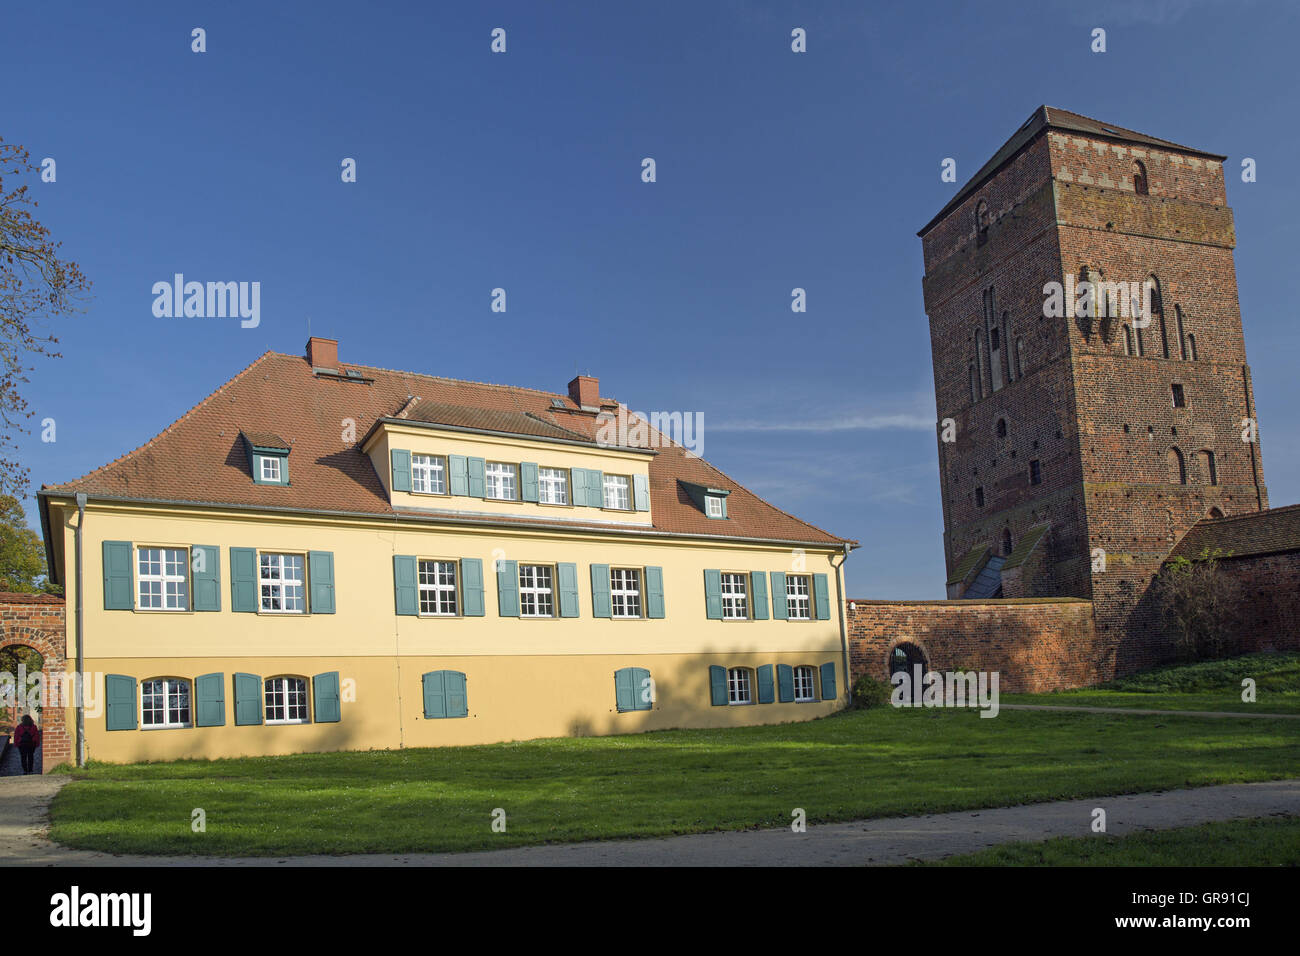 Mayor S House And Office Tower Of The Old Bishop S Castle In Wittstock  Dosse, Mecklenburg Stock Photo